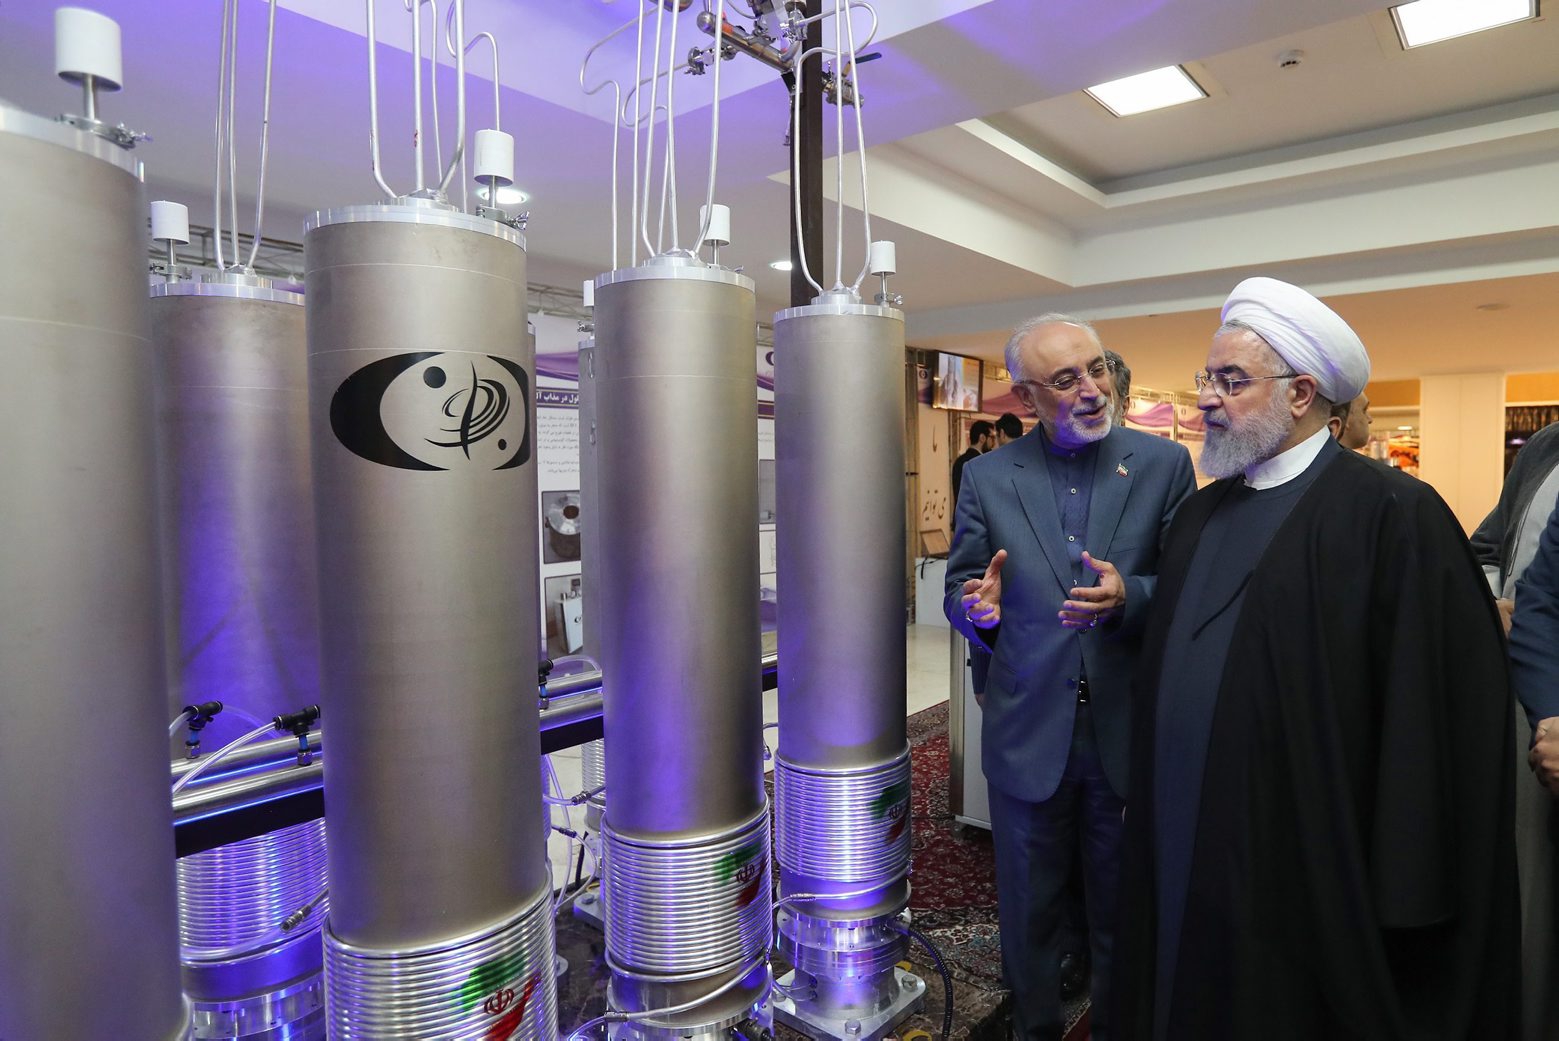 epa07700786 (FILE) - A handout file picture made available by the presidential office shows Iranian President Hassan Rouhani (R) and the head of Iran nuclear technology organization Ali Akbar Salehi inspecting nuclear technology on the occasion of Iran National Nuclear Technology Day in Tehran, Iran, 09 April 2019 (reissued 07 July 2019). Iran on 07 July 2019) said it was to exceed the limit on uranium enrichment, the second such breach that crosses the limit set in 2015 in a nuclear agreement with leading powers. Iranian government press spokesperson Ali Rabiei said at a press conference Iran would cross the limit of 3.67 per cent enrichment.  EPA/IRANIAN PRESIDENCY OFFICE HANDOUT  HANDOUT EDITORIAL USE ONLY/NO SALES (FILE) IRAN NUCLEAR DEAL ENRICHED URANIUM